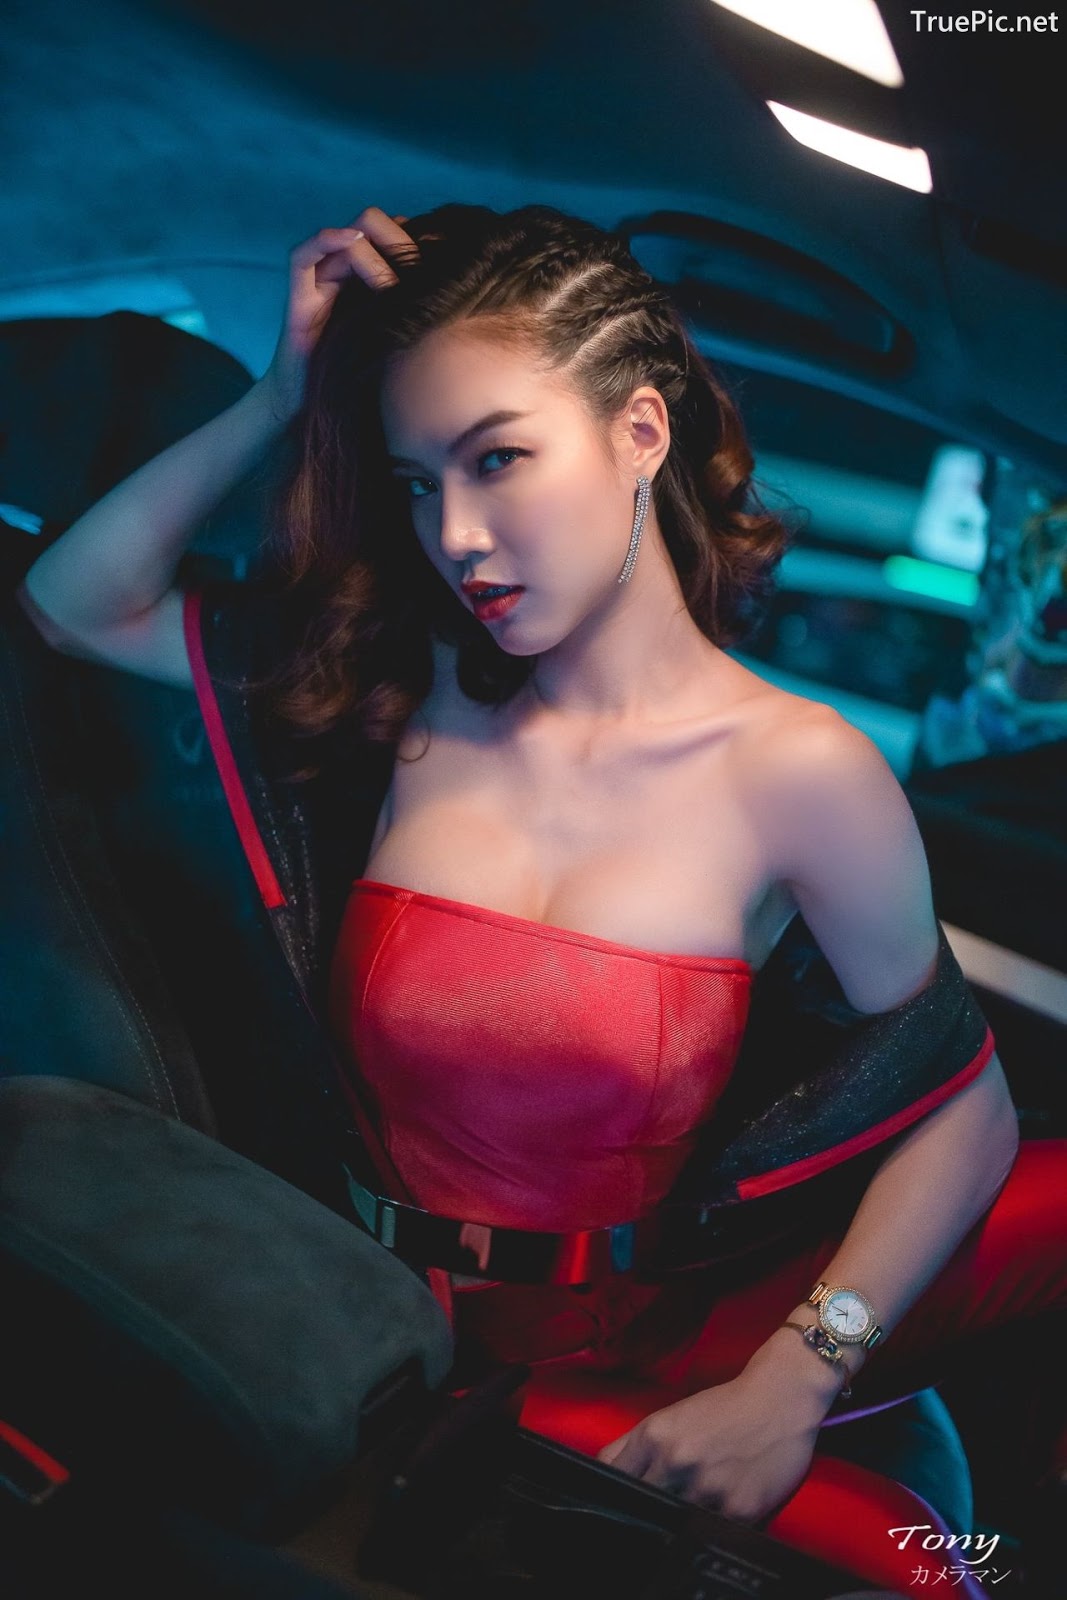 Image-Thailand-Hot-Model-Thai-Racing-Girl-At-Motor-Expo-2019-TruePic.net- Picture-87